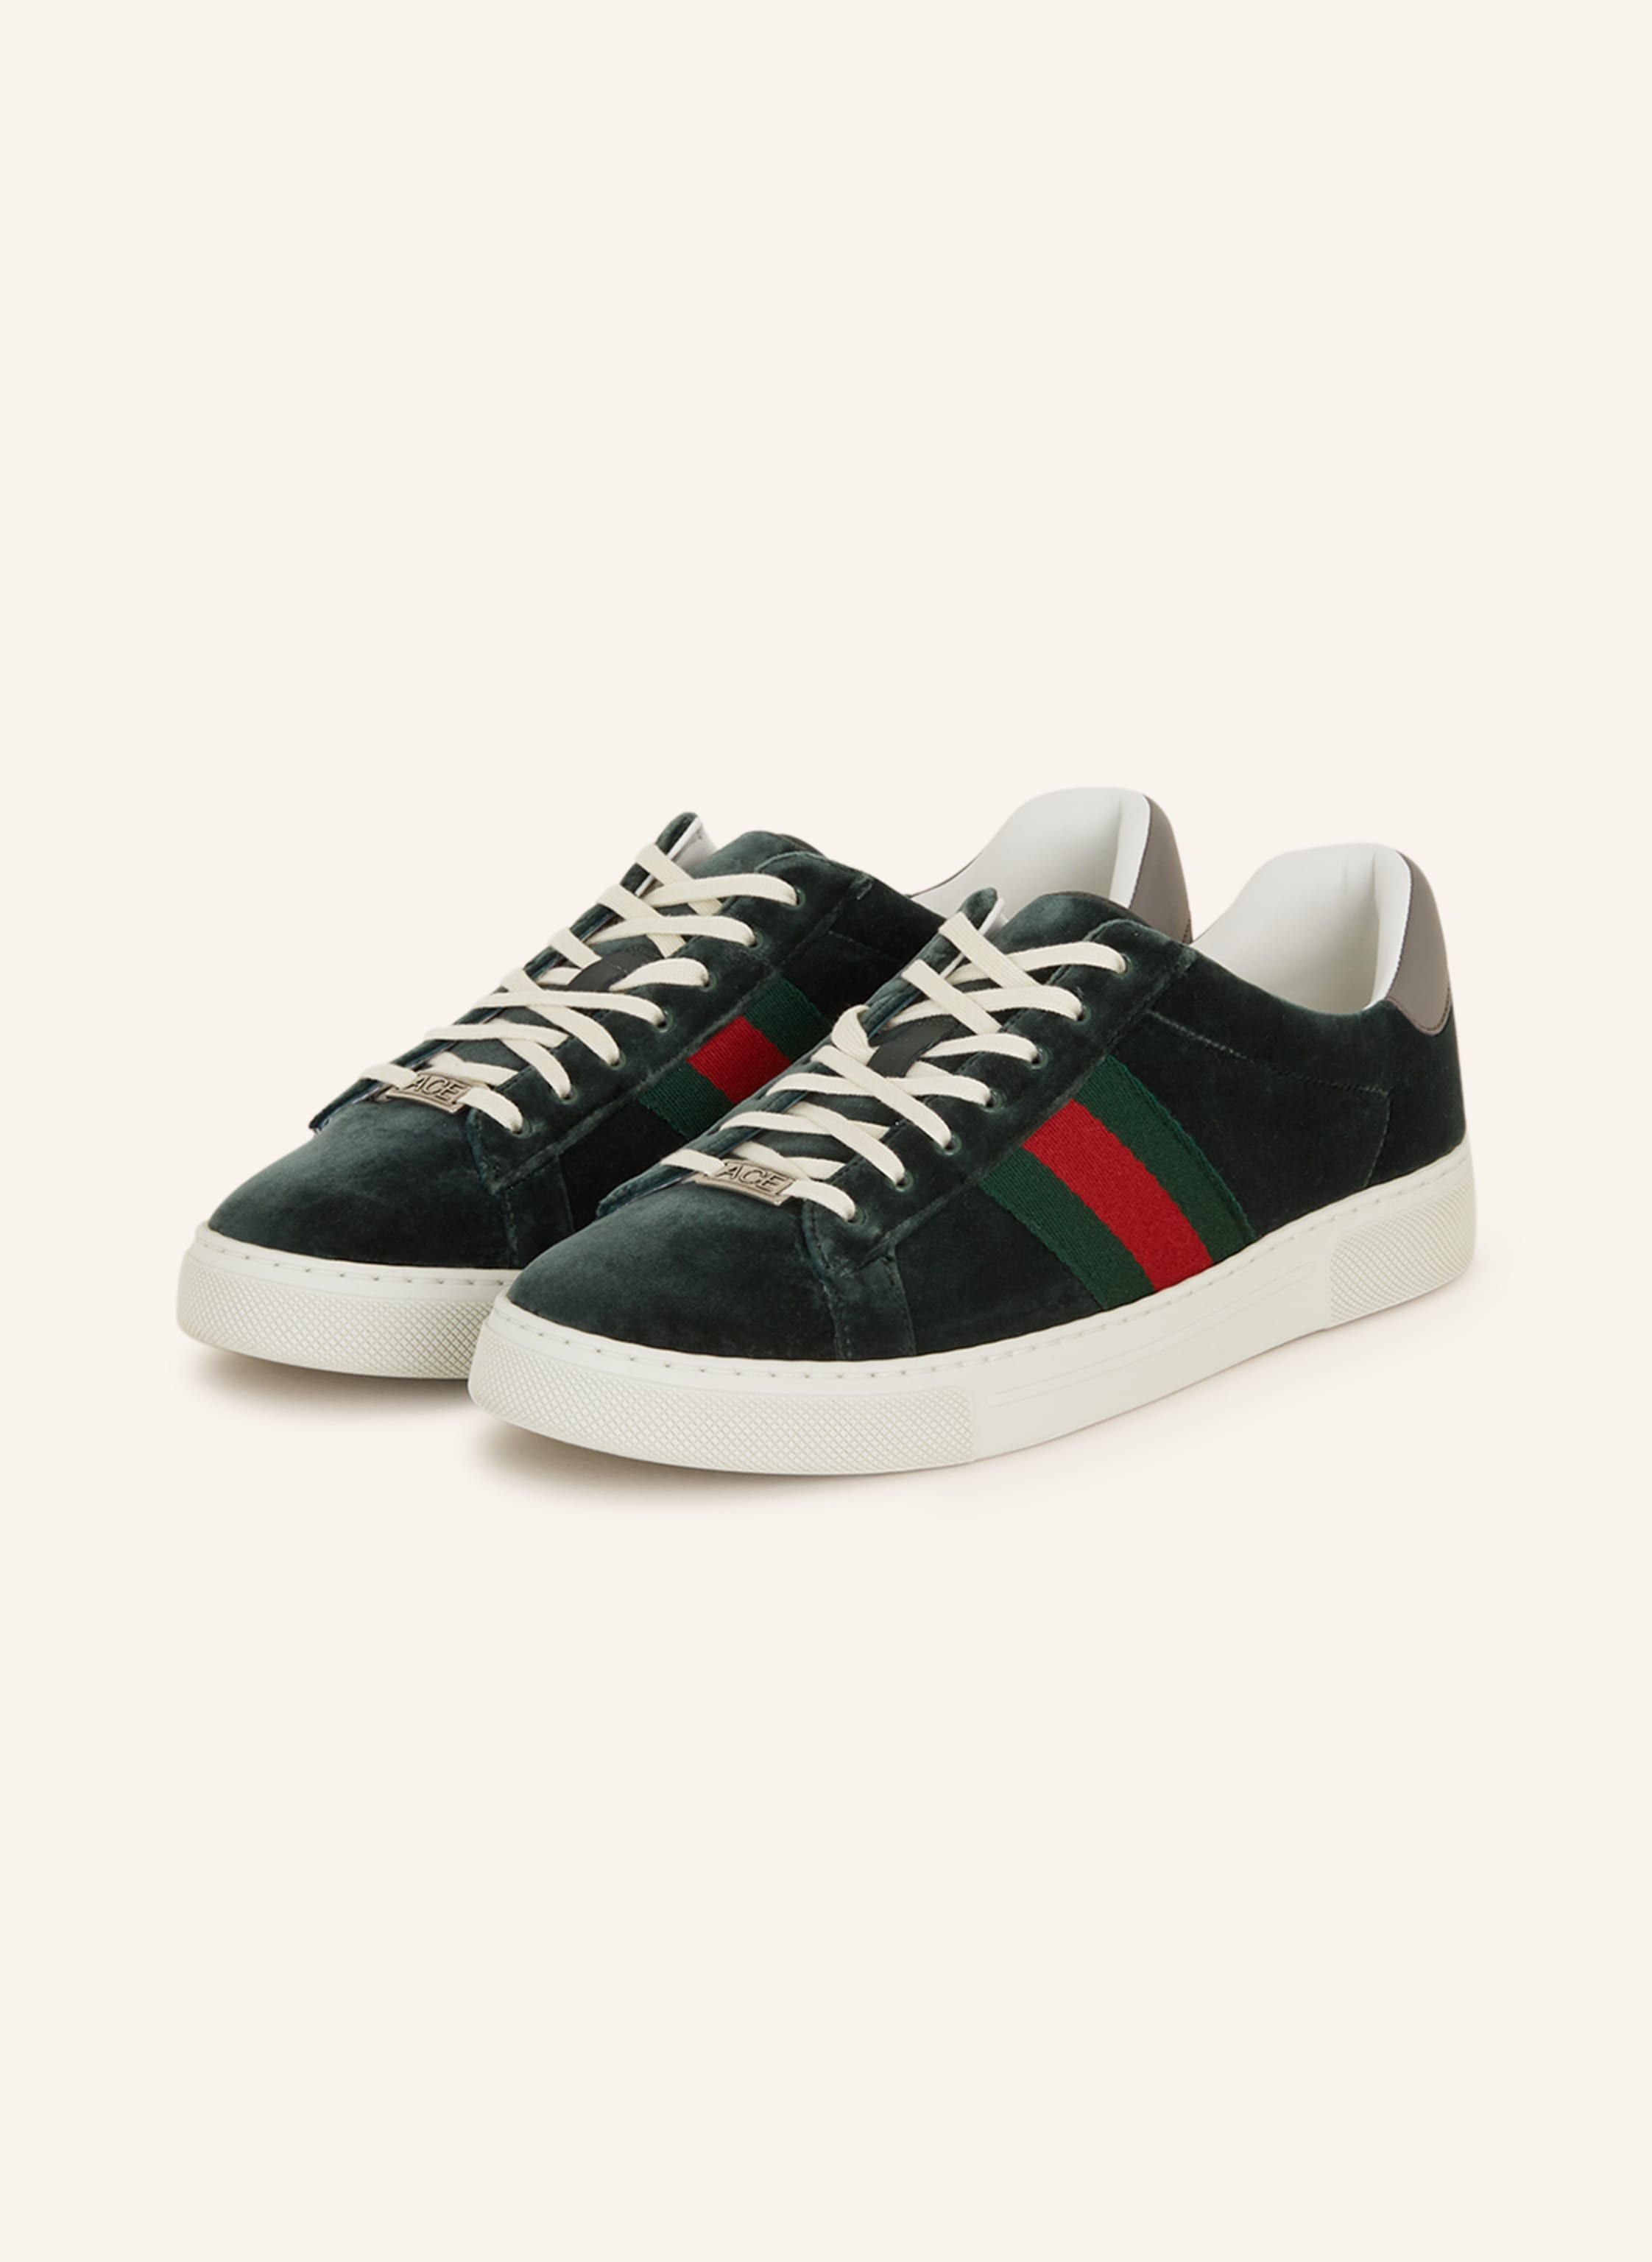 47 Best Gucci Ace Sneakers ideas  gucci ace sneakers, gucci sneakers outfit,  sneaker outfits women